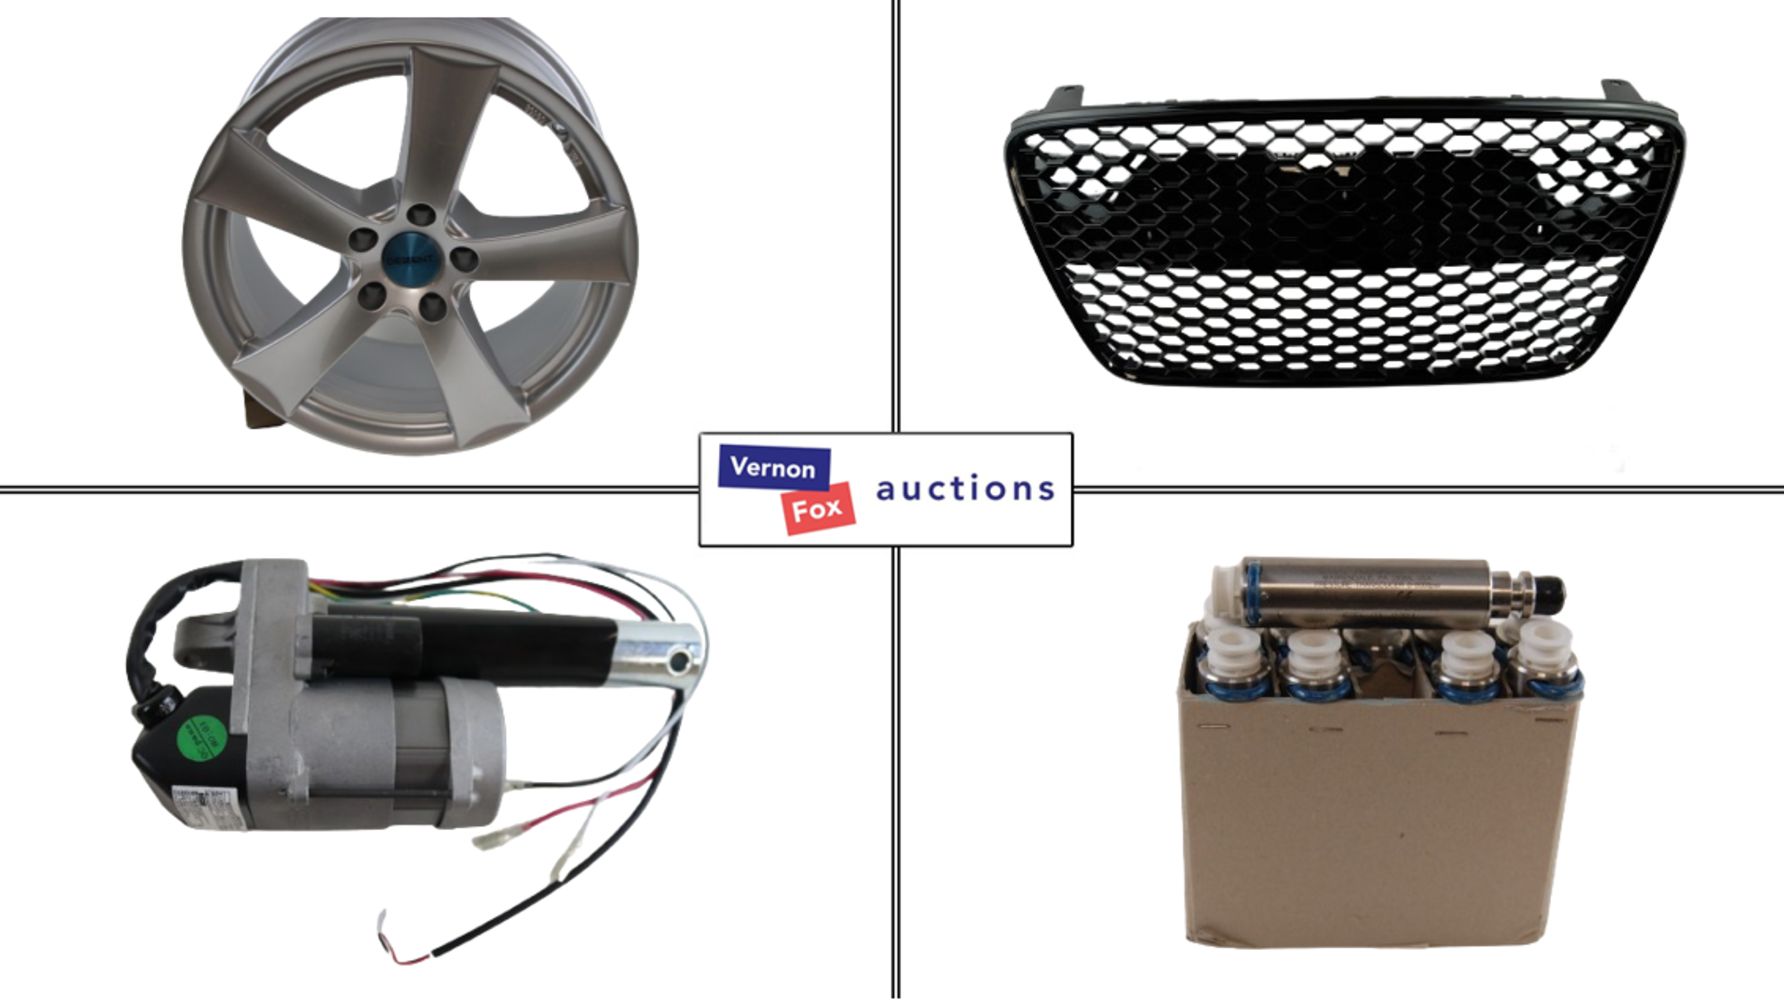 FREE UK DELIVERY: Stock Clearance, Auto & Industrial Items, Many Items £1.00 bidding increments